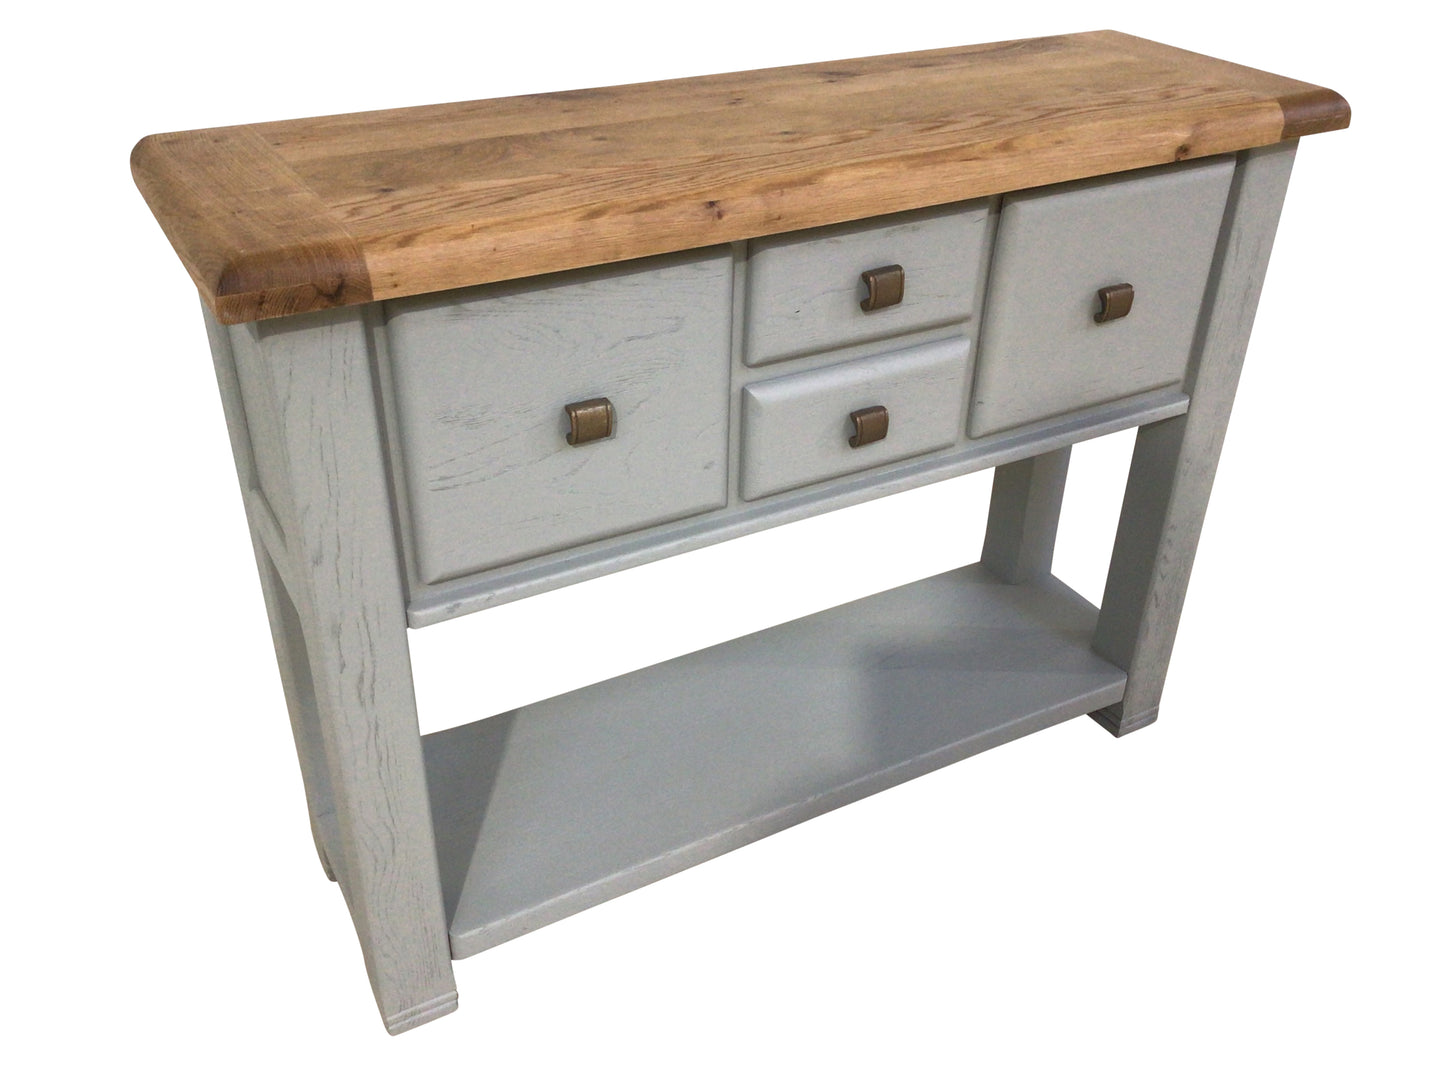 Danube Weathered Oak Hall Table painted French Grey